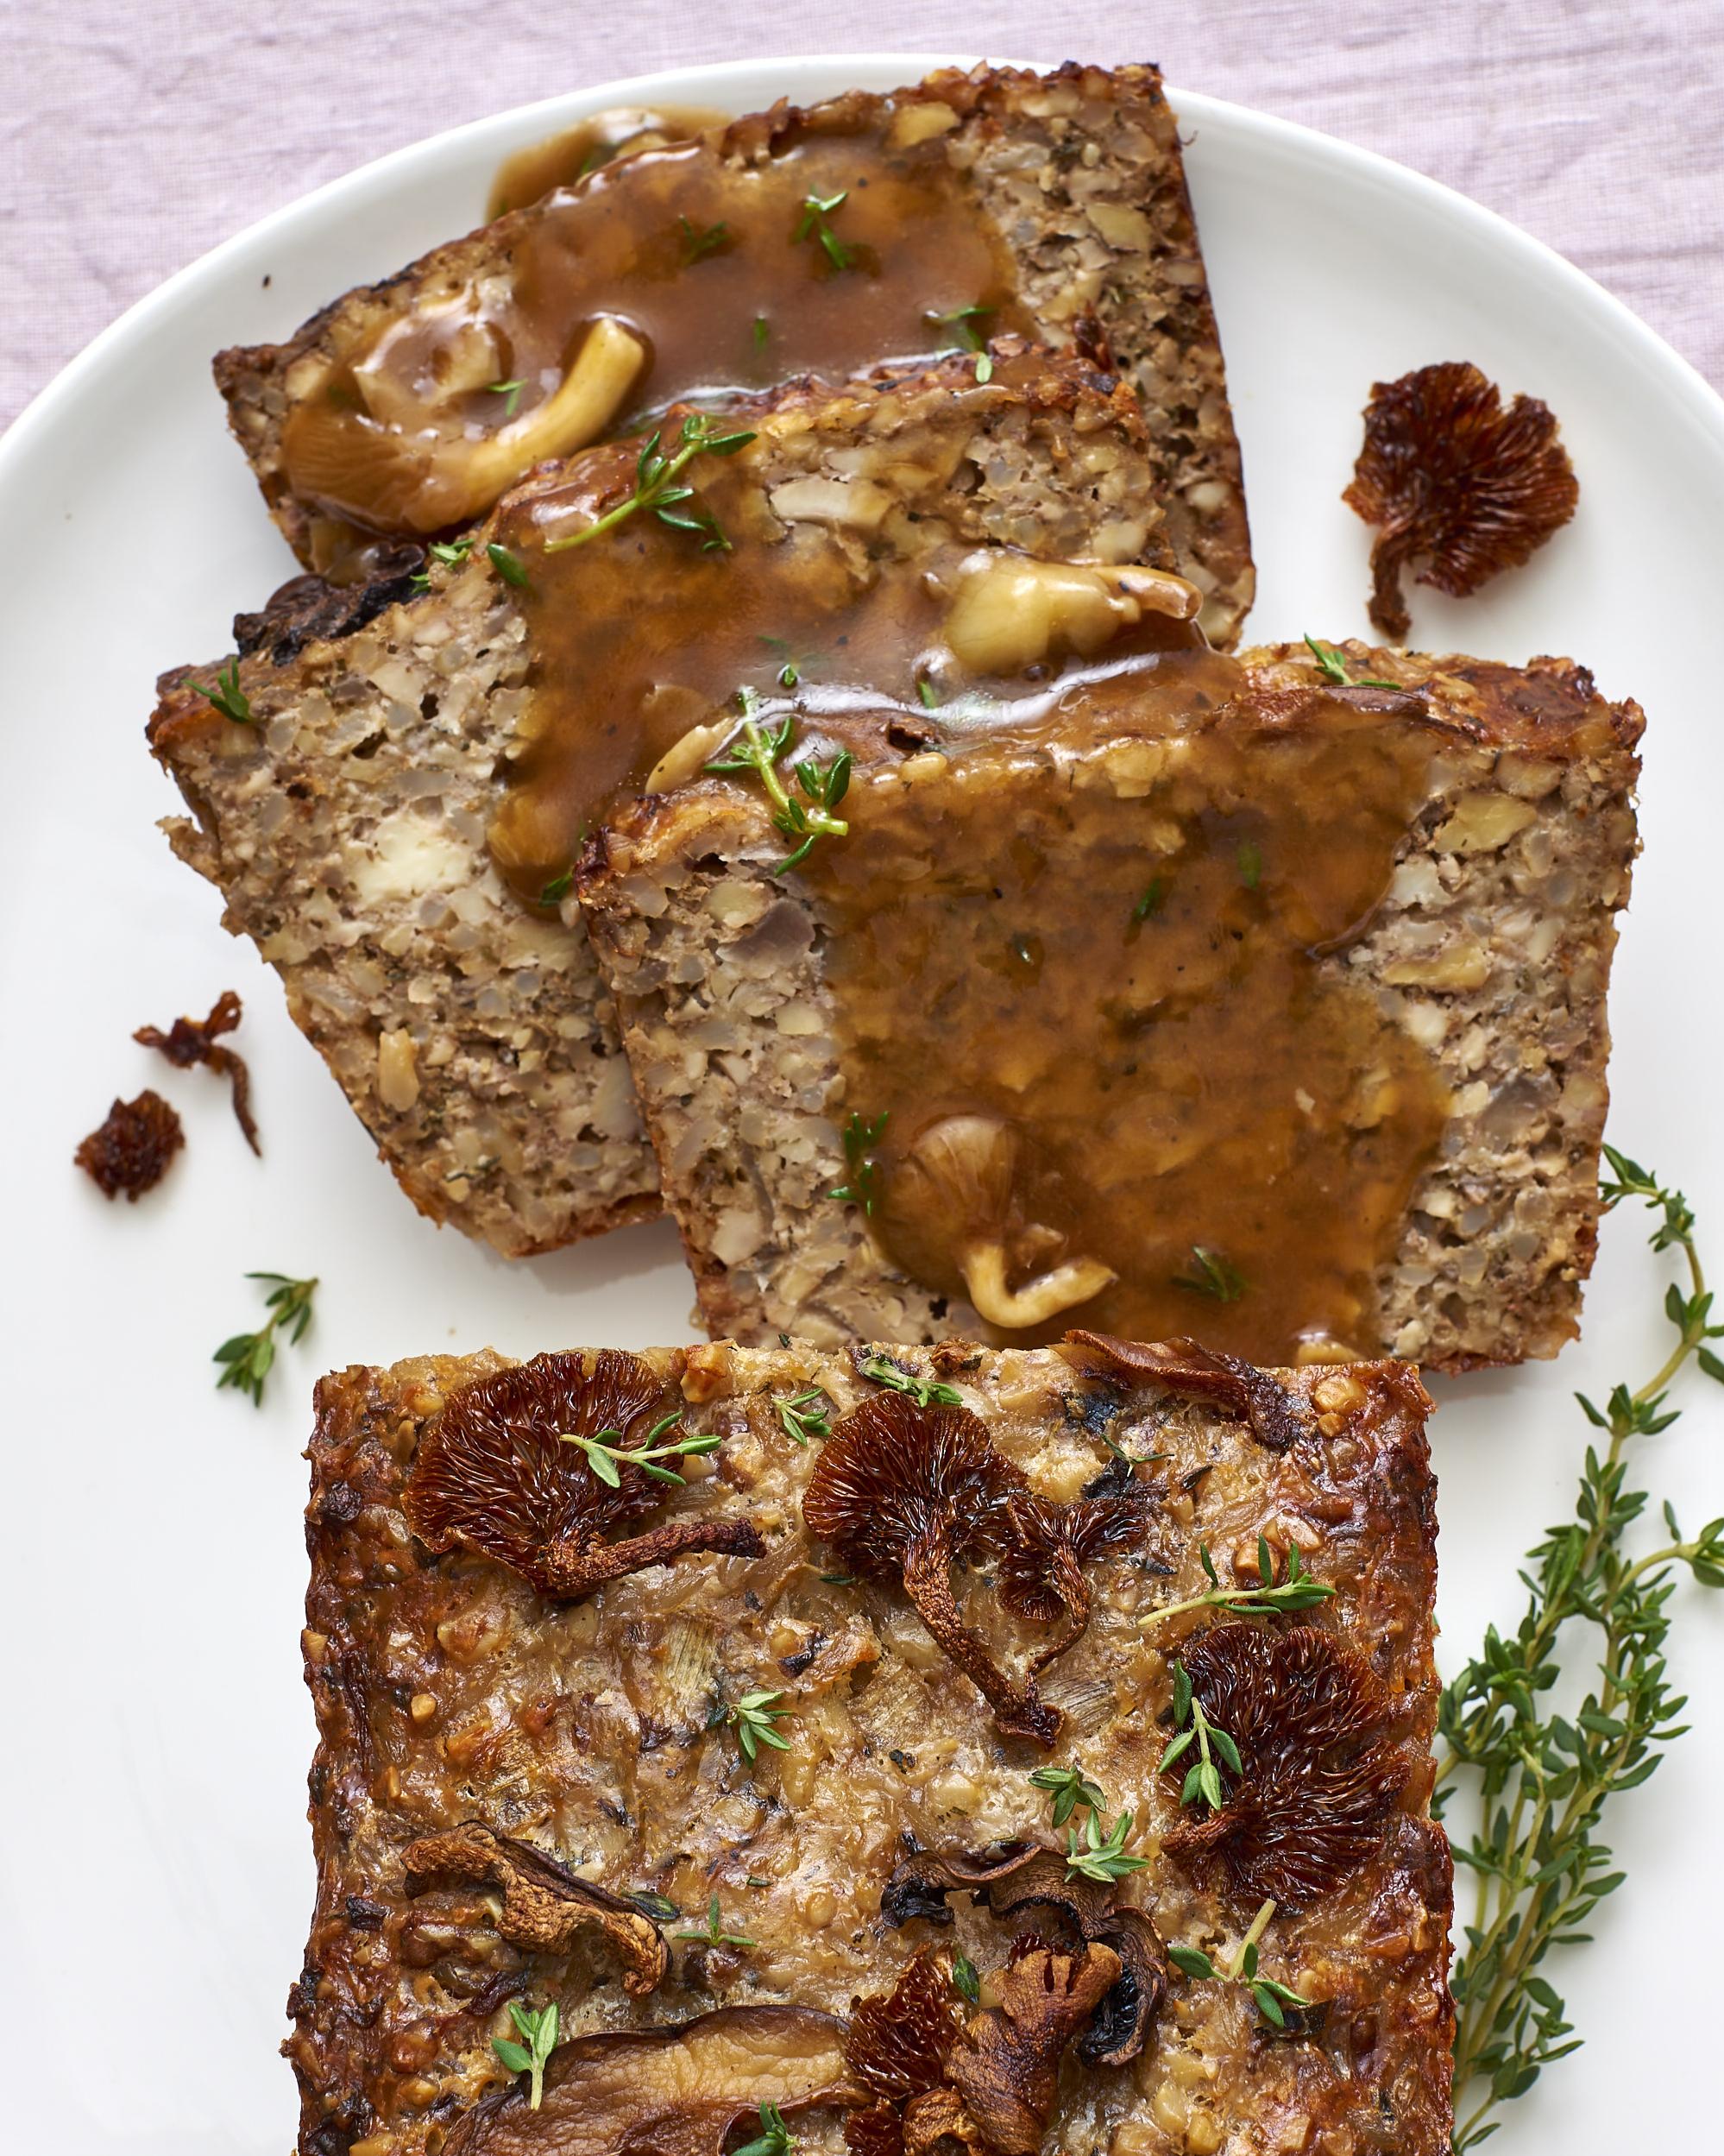  A hearty, flavorful, and gluten-free mushroom nut loaf.